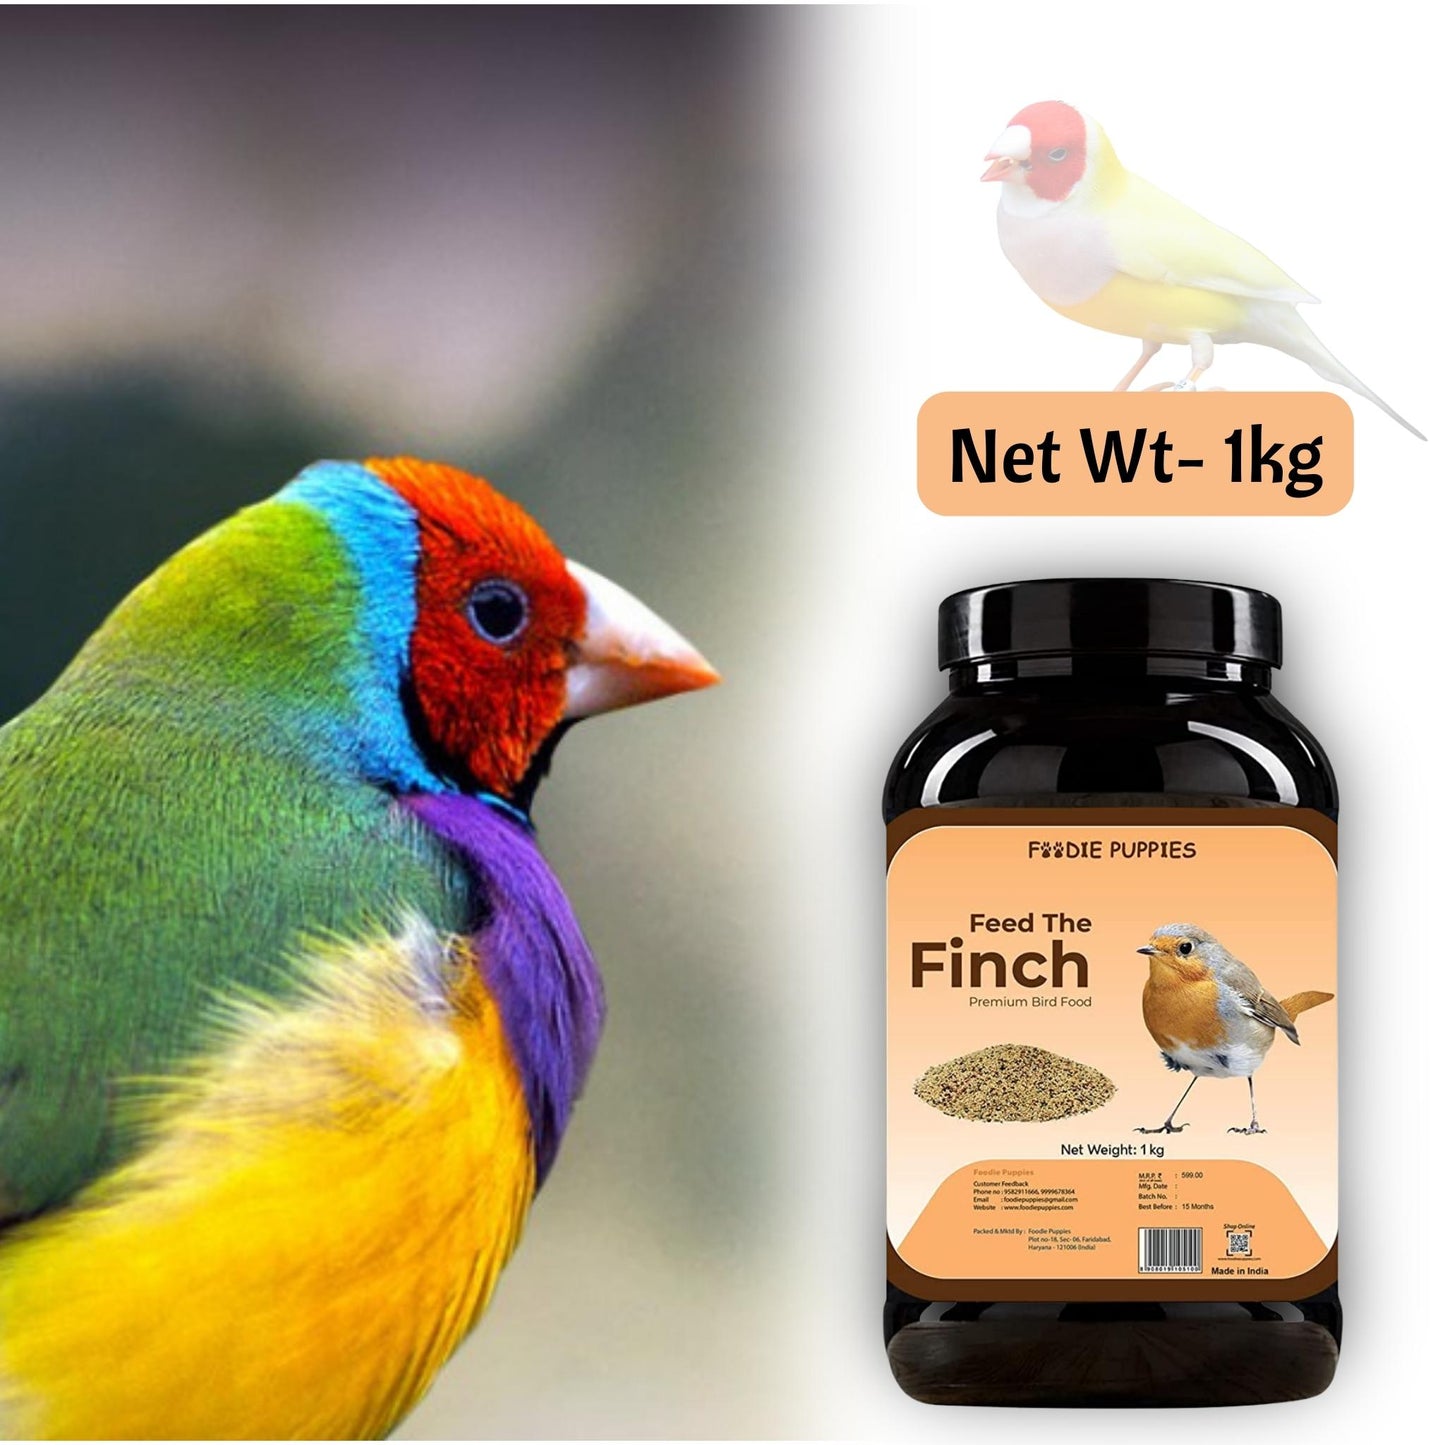 Foodie Puppies Finch Seeds - 1Kg | Suitable for All Types of Birds